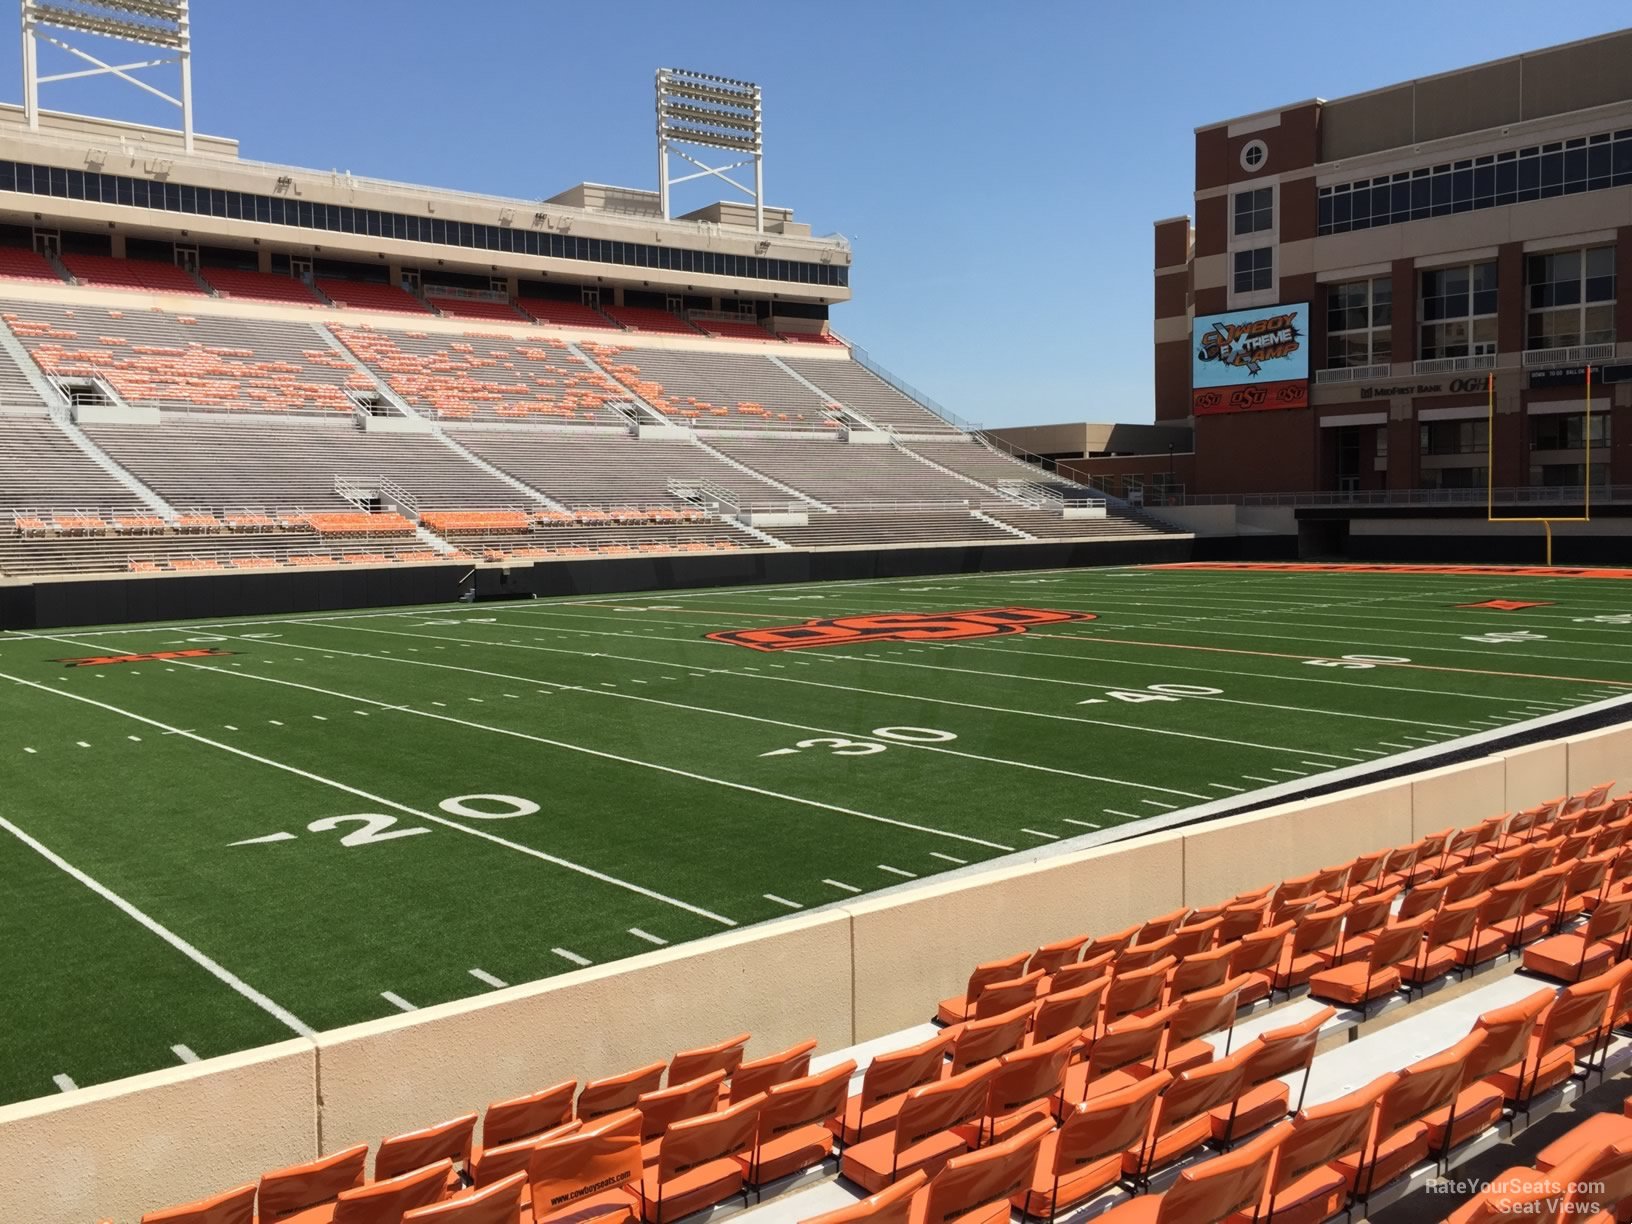 section 107, row 10 seat view  - boone pickens stadium